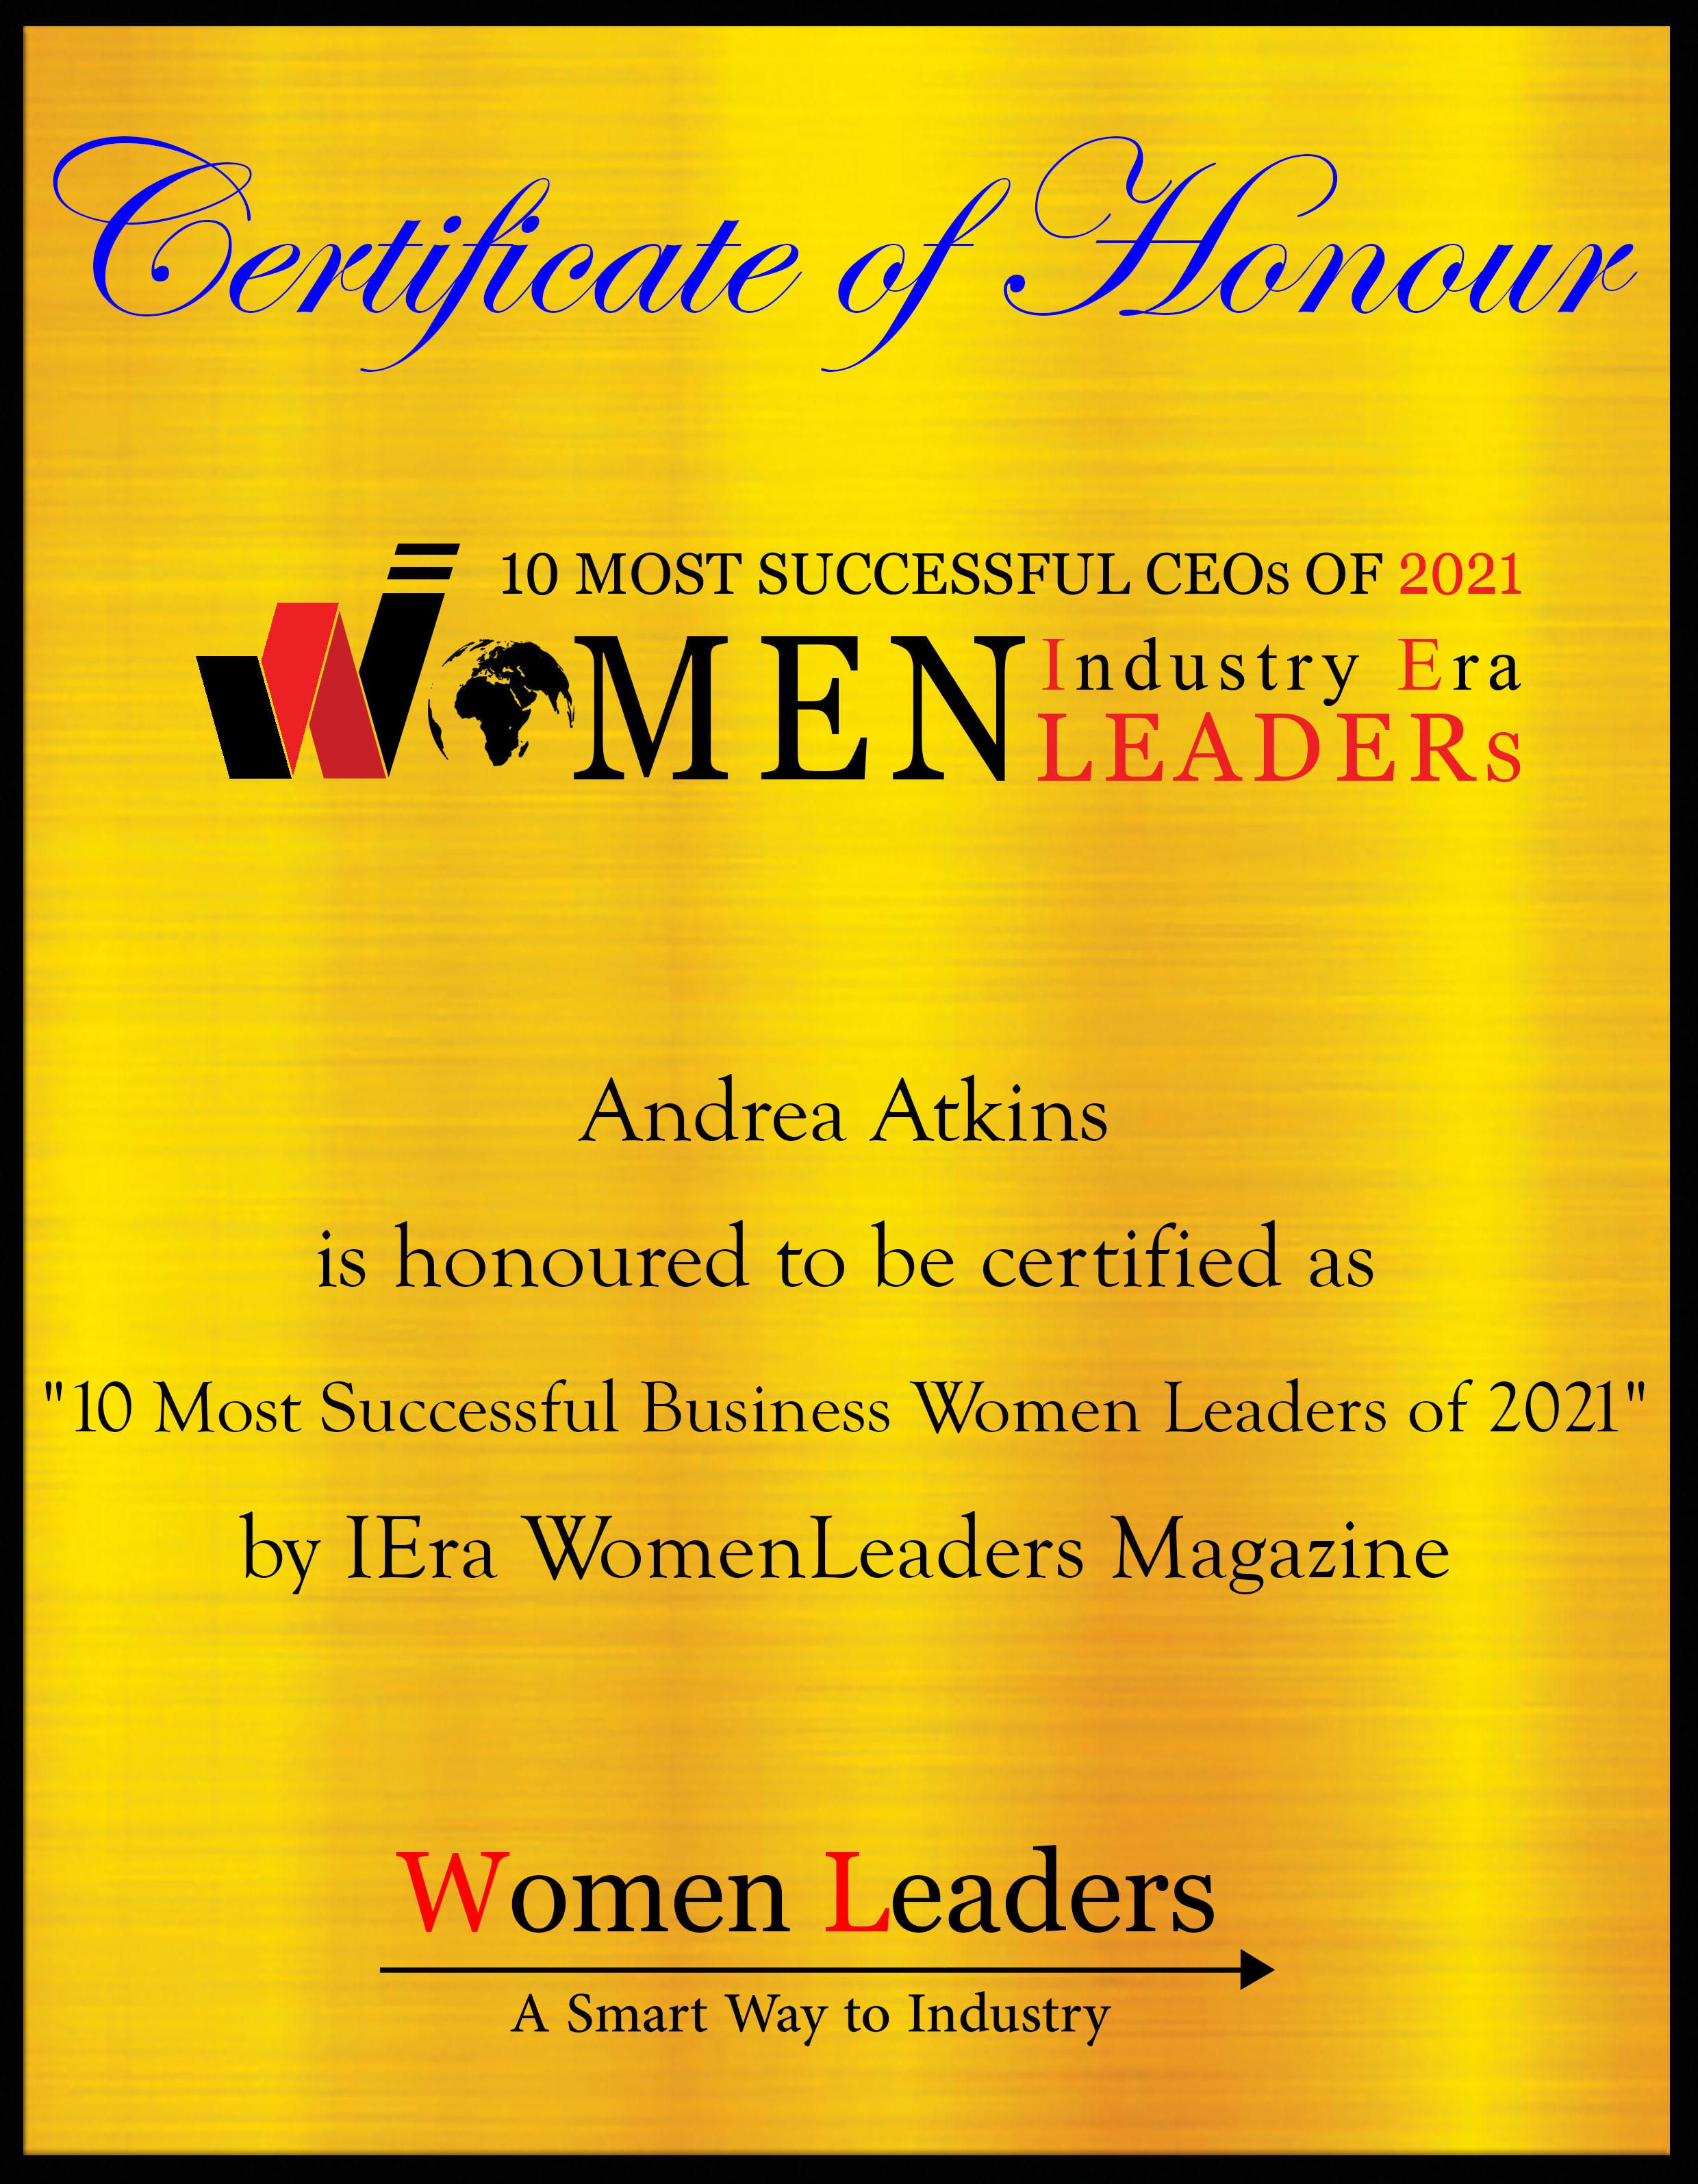 Andrea Atkins, Marketing Manager at Google, Most Successful Business Women Leaders of 2021